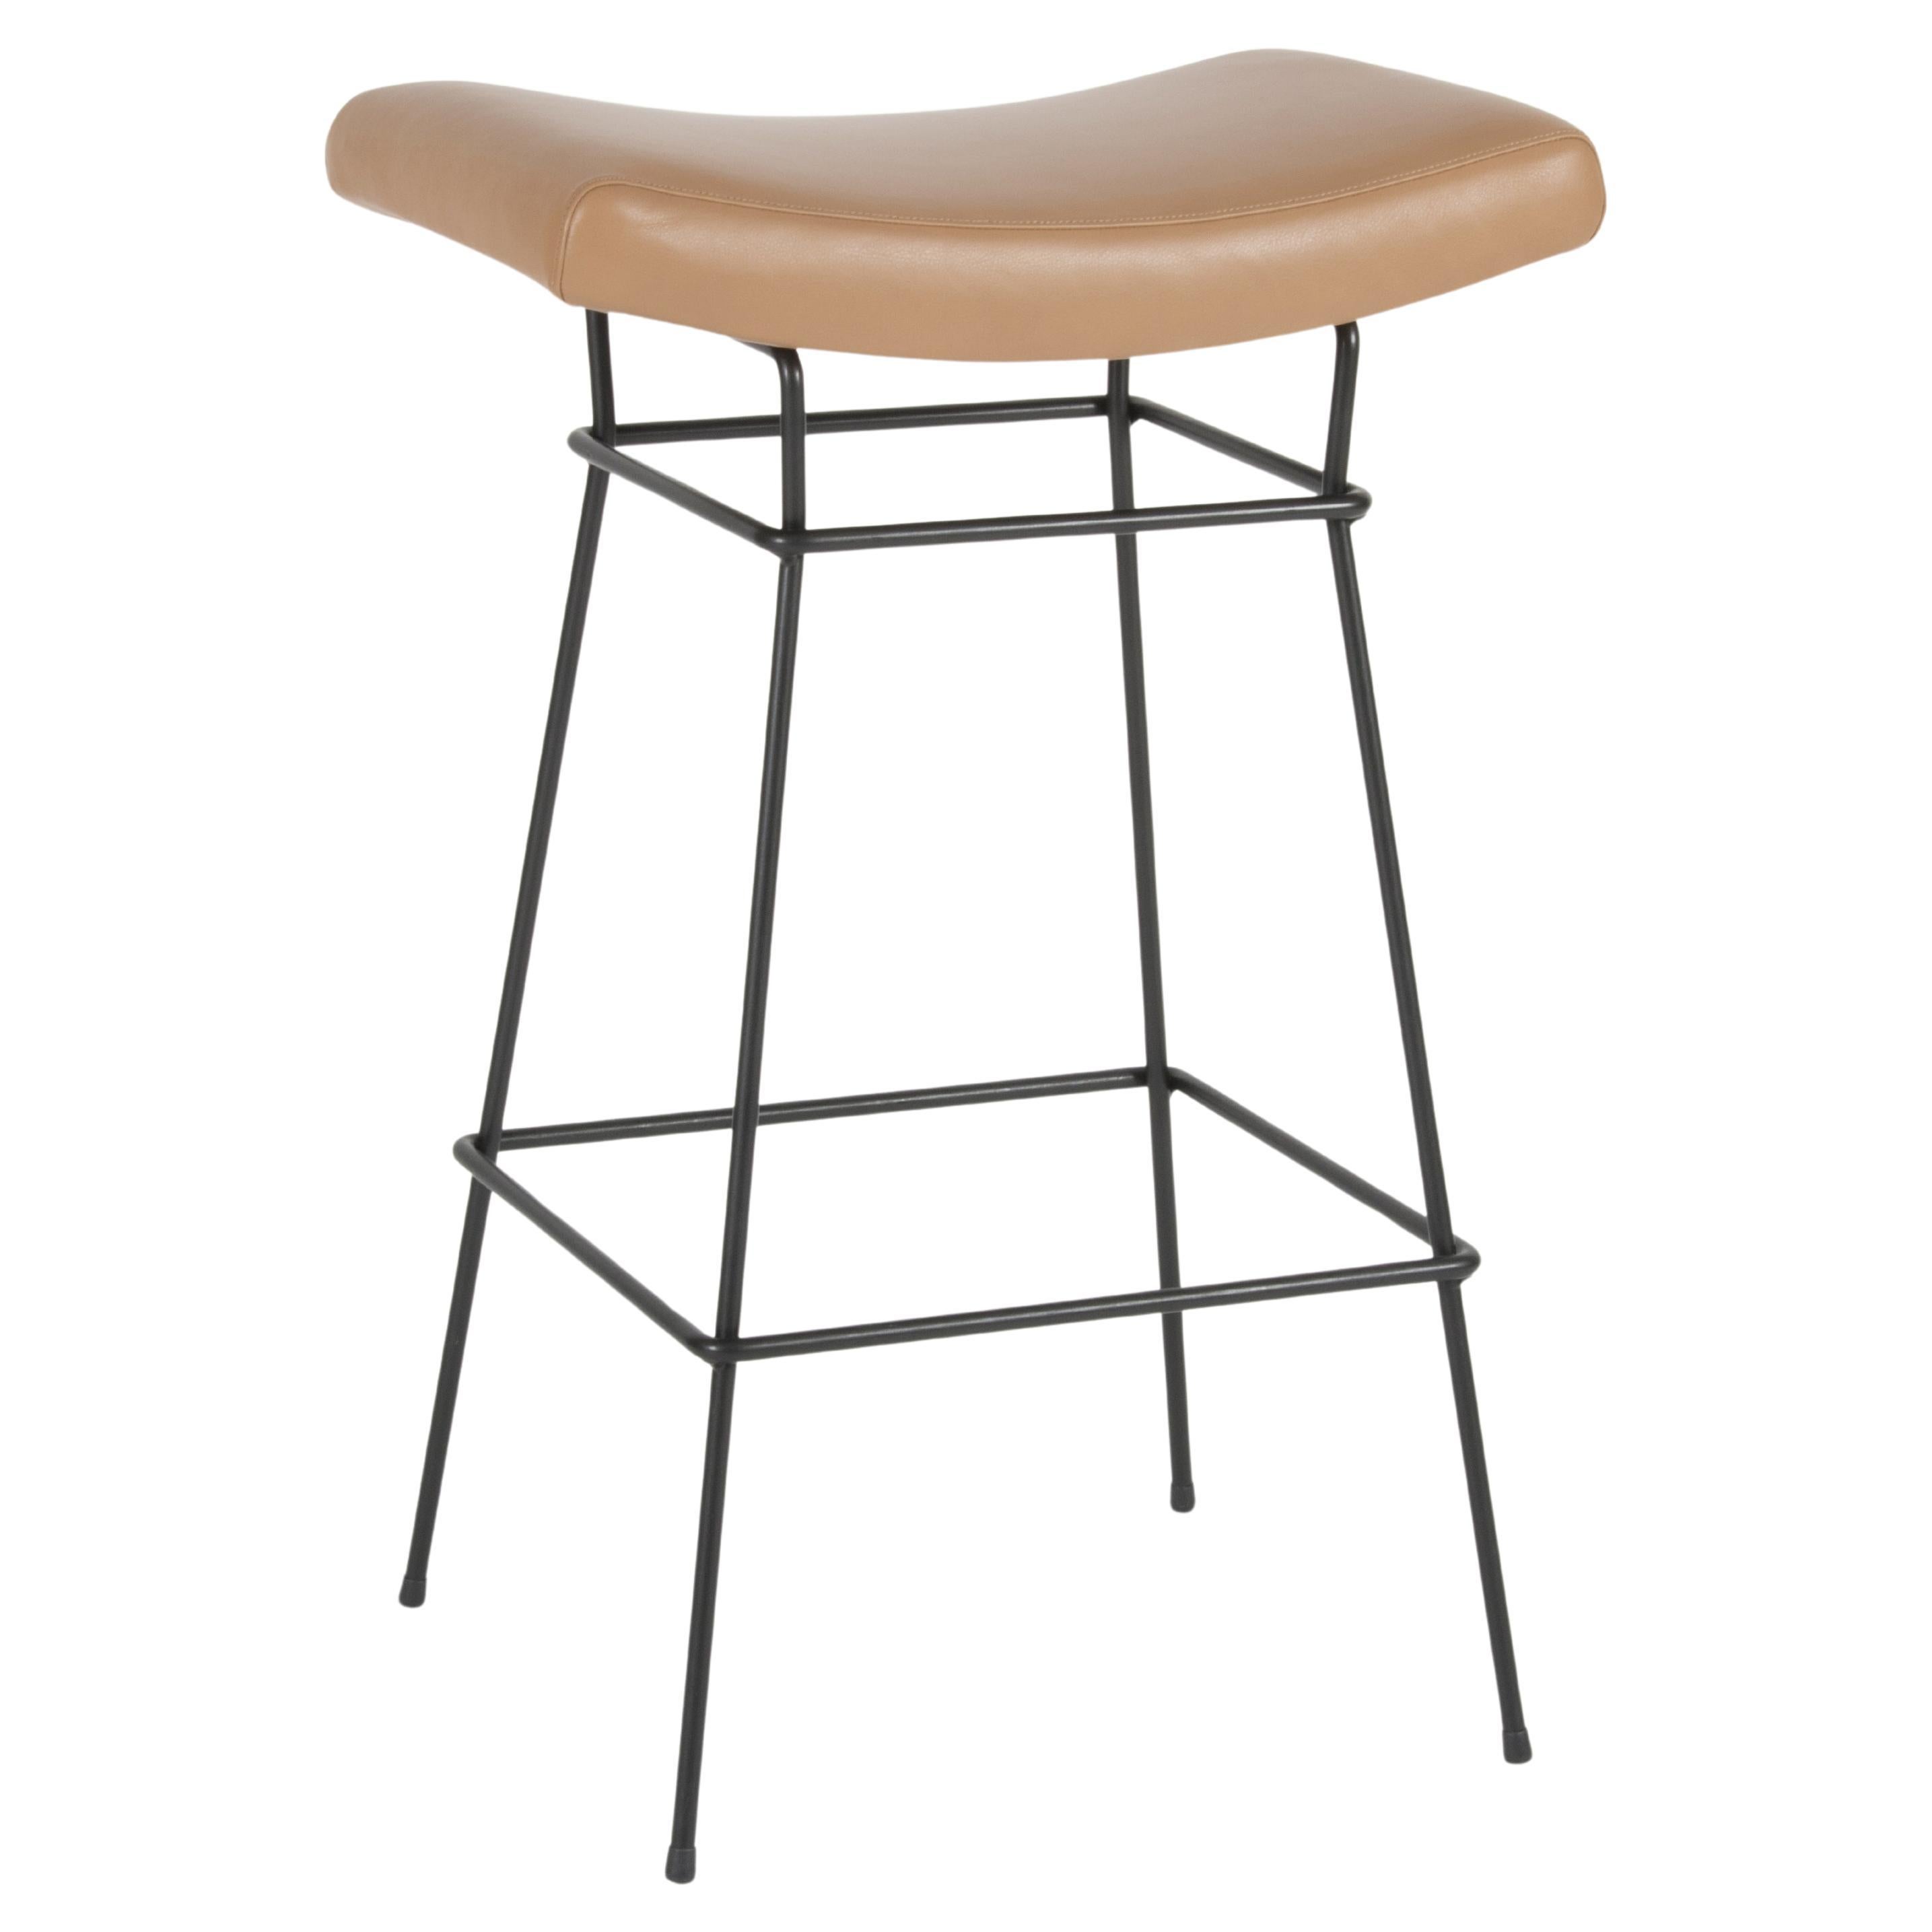 What kind of stool is good for a kitchen island?